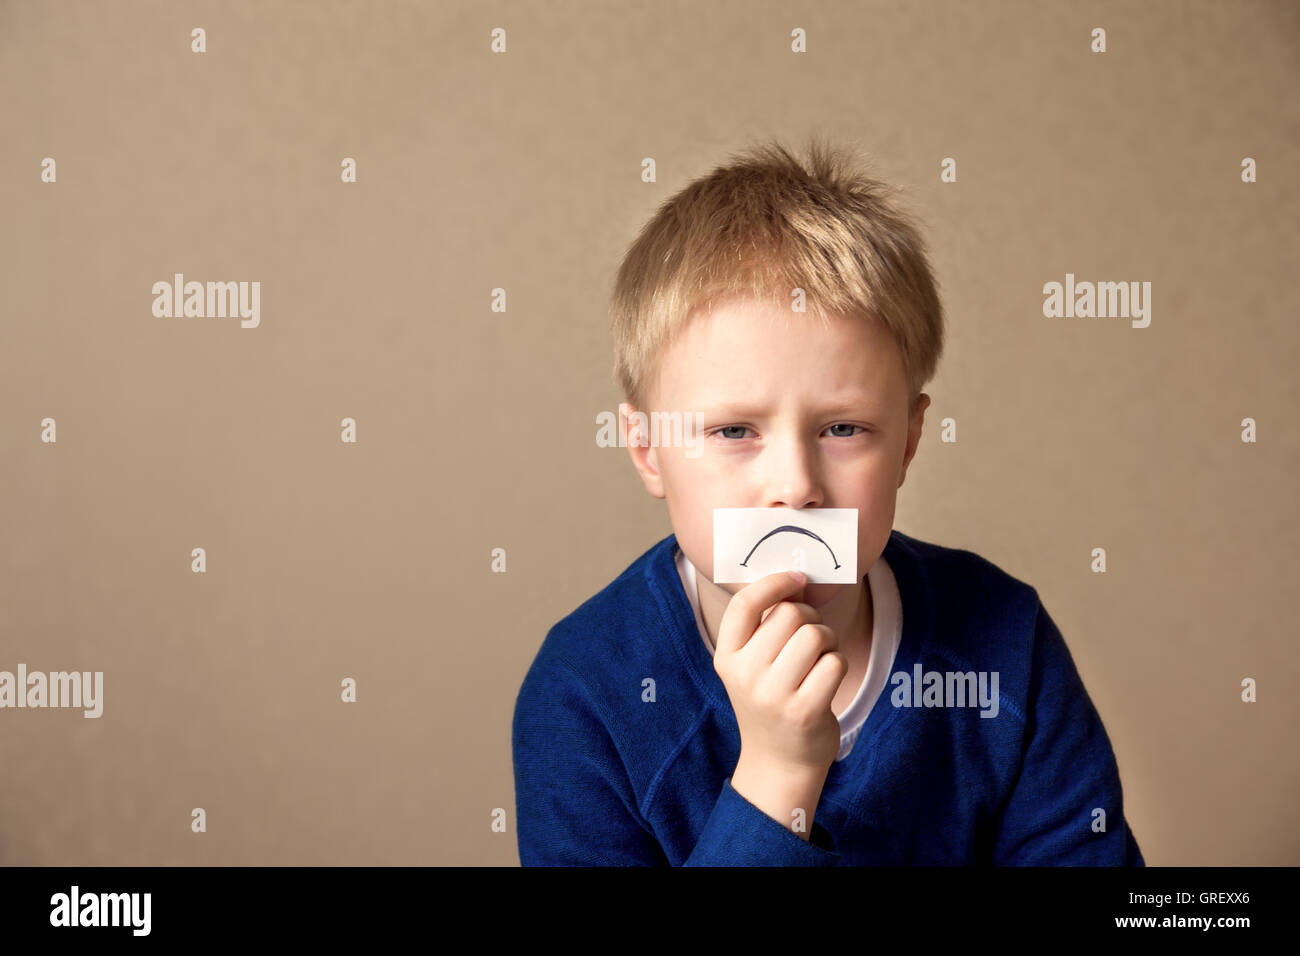 Upset sad young boy (teen) goes to stress, negative mood. Portrait with copy space Stock Photo